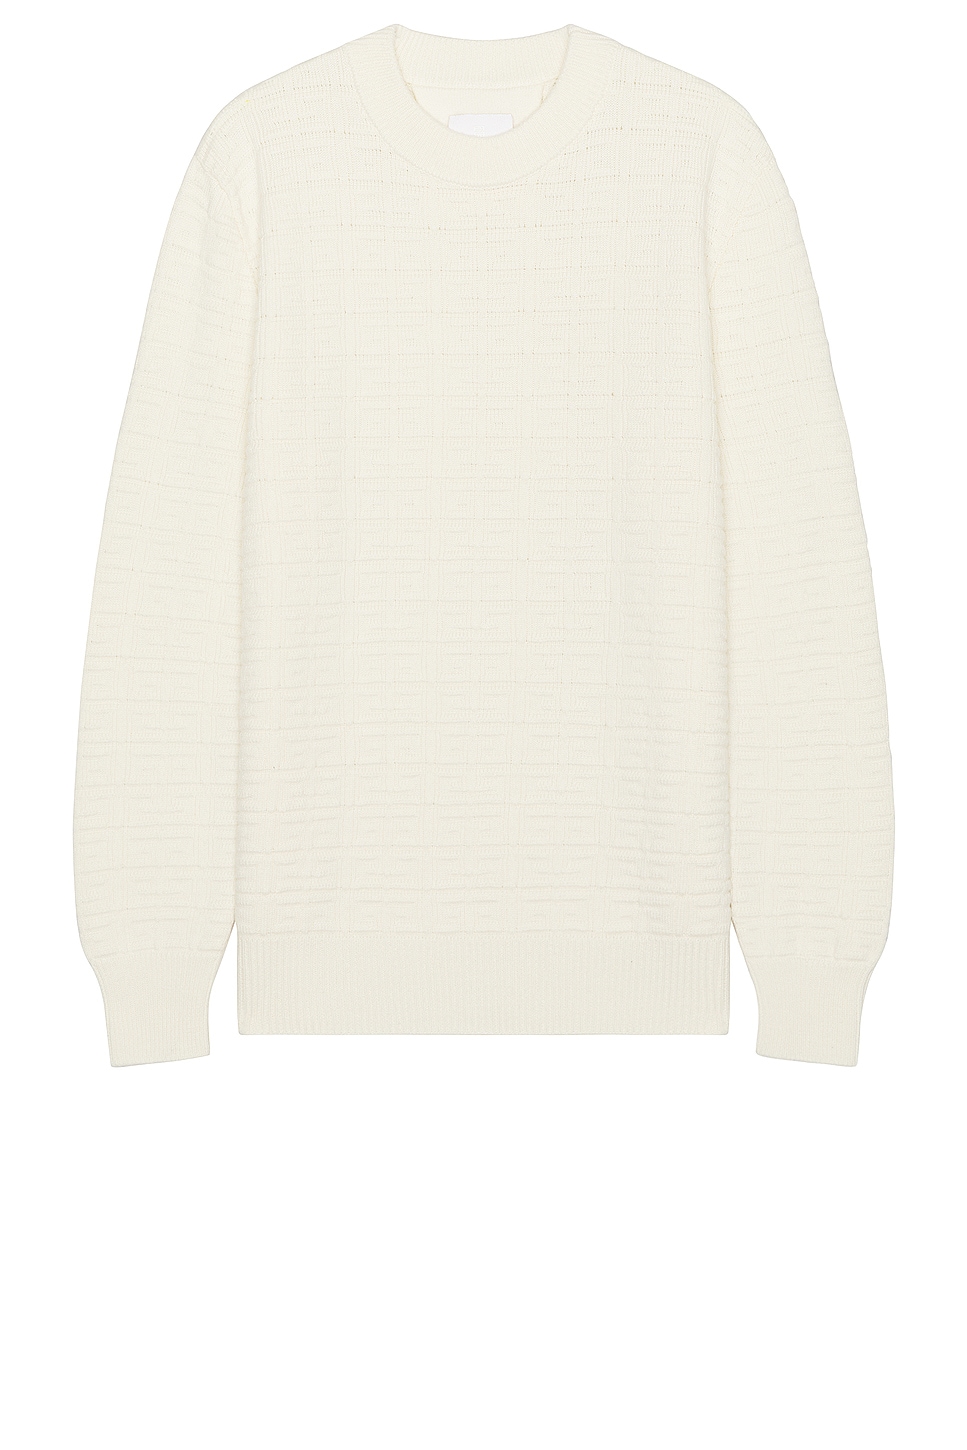 Image 1 of Givenchy Crew Neck Jumper in Cream